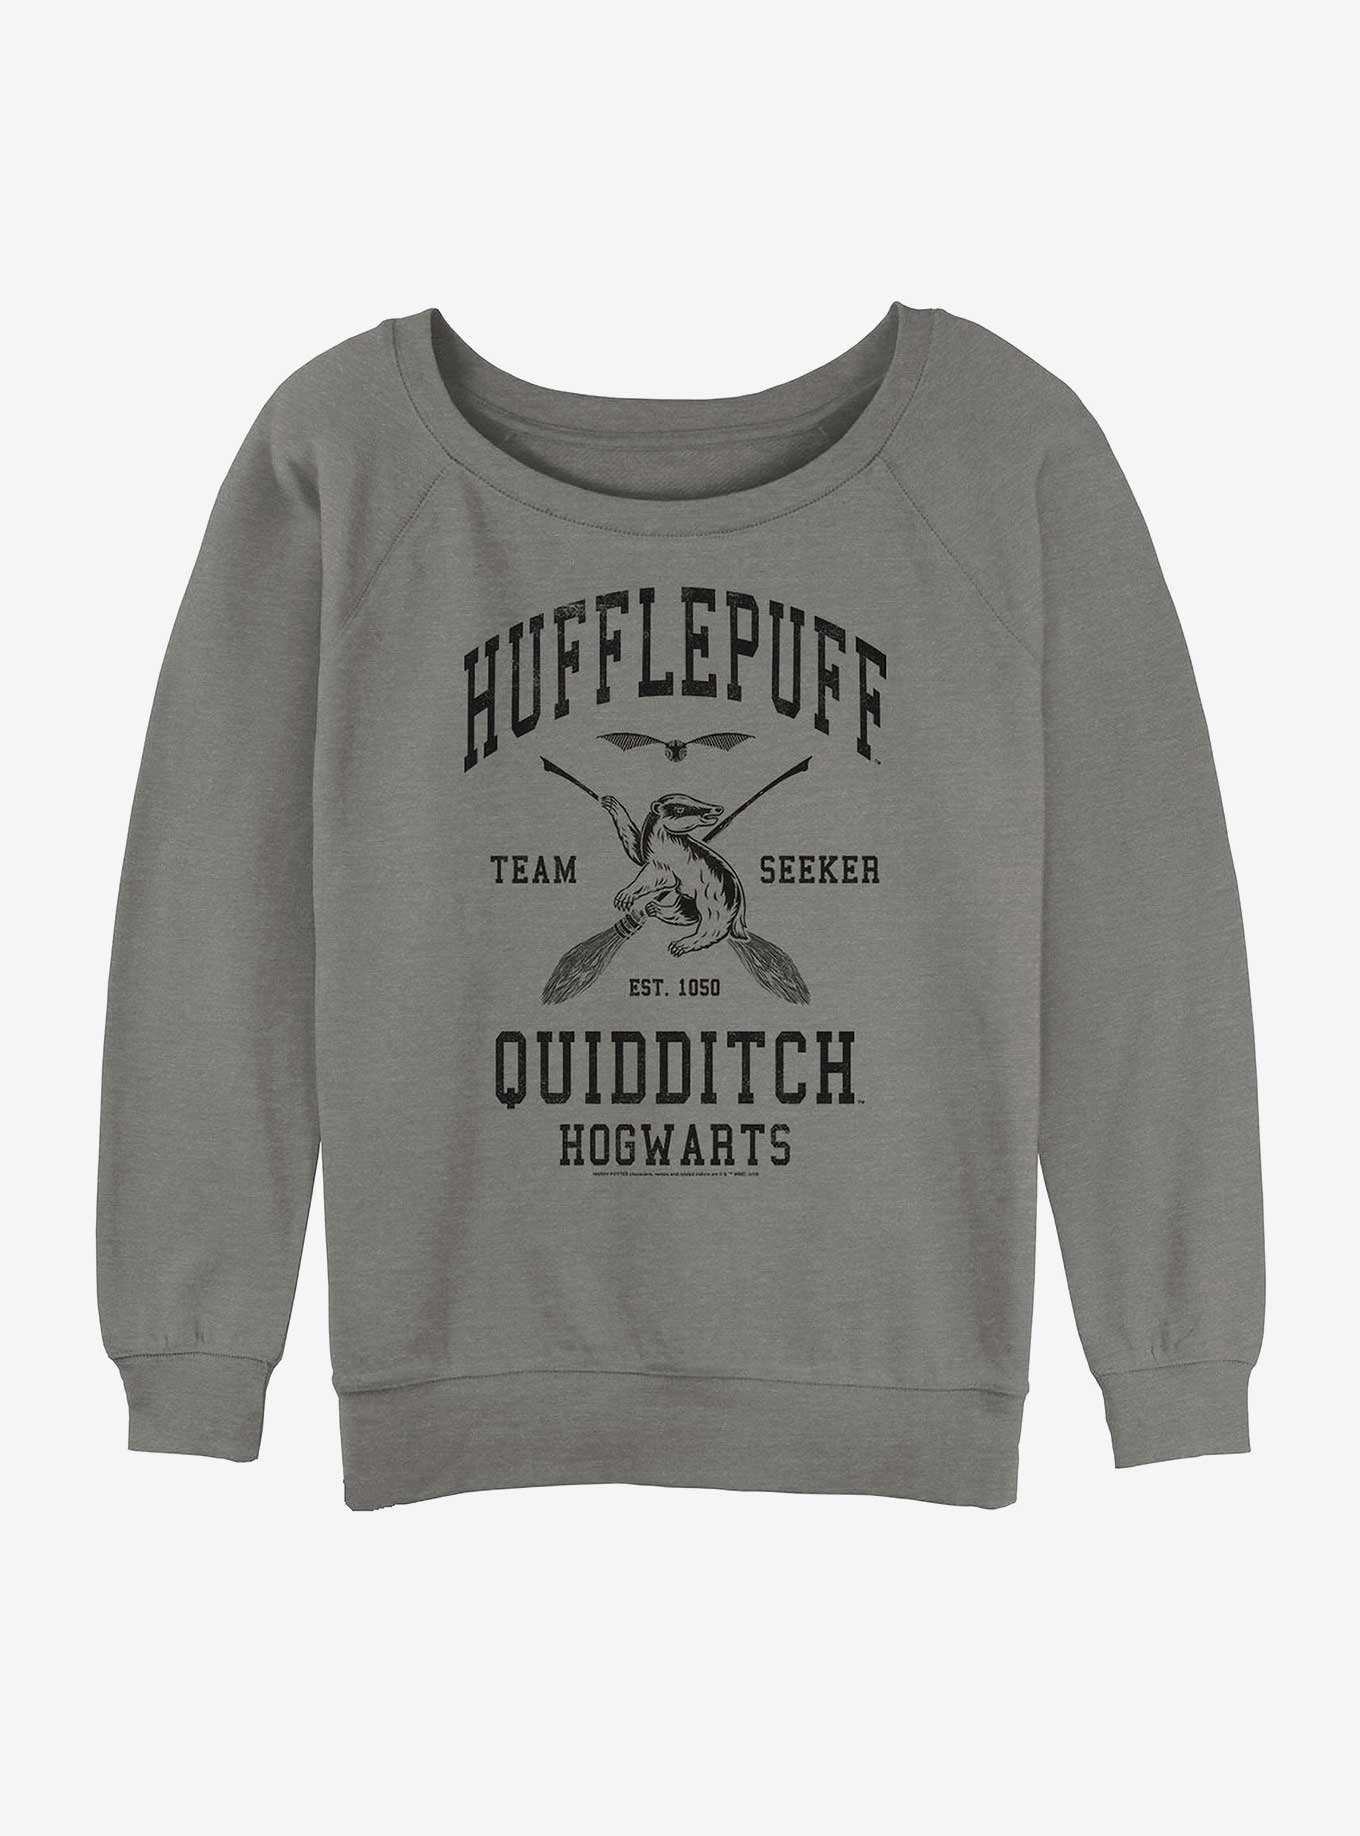 OFFICIAL BoxLunch | T-Shirts, Hufflepuff Merch Harry Potter & Sweaters